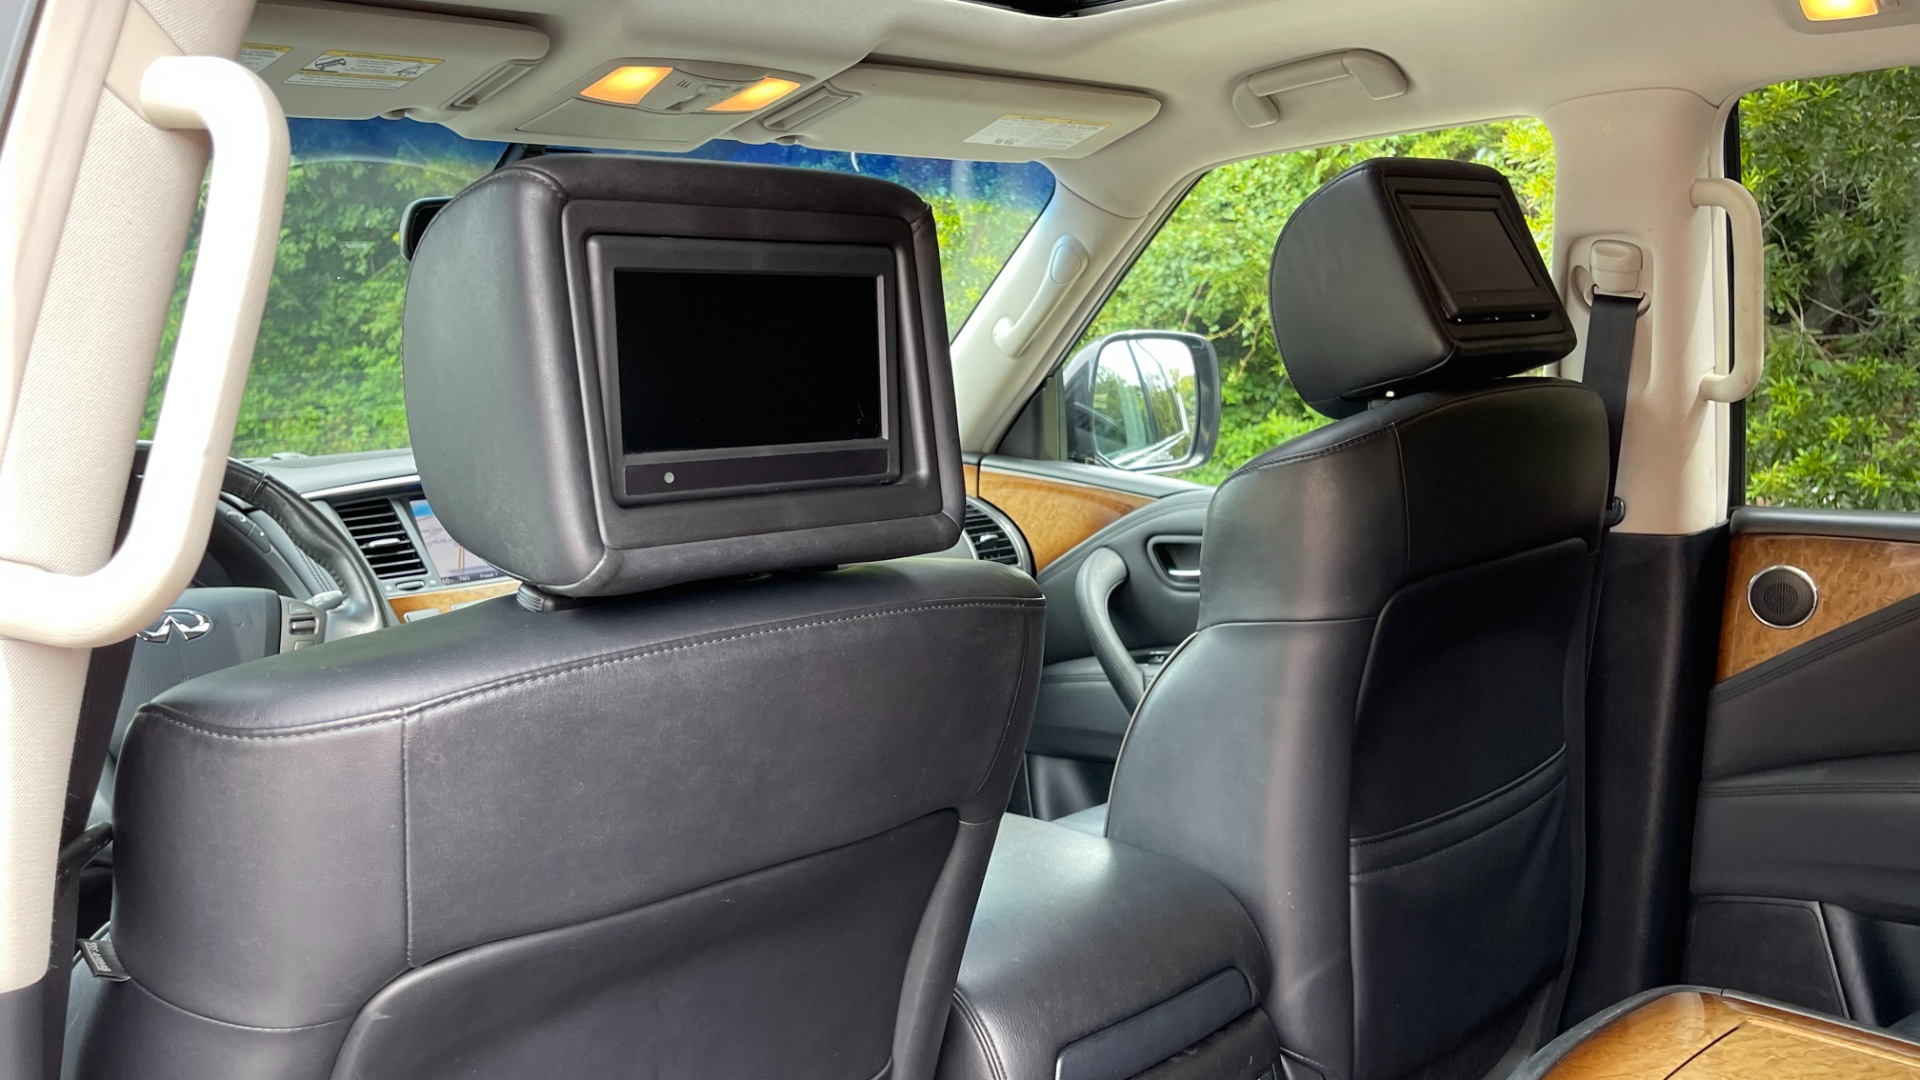 Used 2012 INFINITI QX56 7 PASSENGER / THEATER PACKAGE / HEATED SEATS / NAV / REARVIEW for sale Sold at Formula Imports in Charlotte NC 28227 35